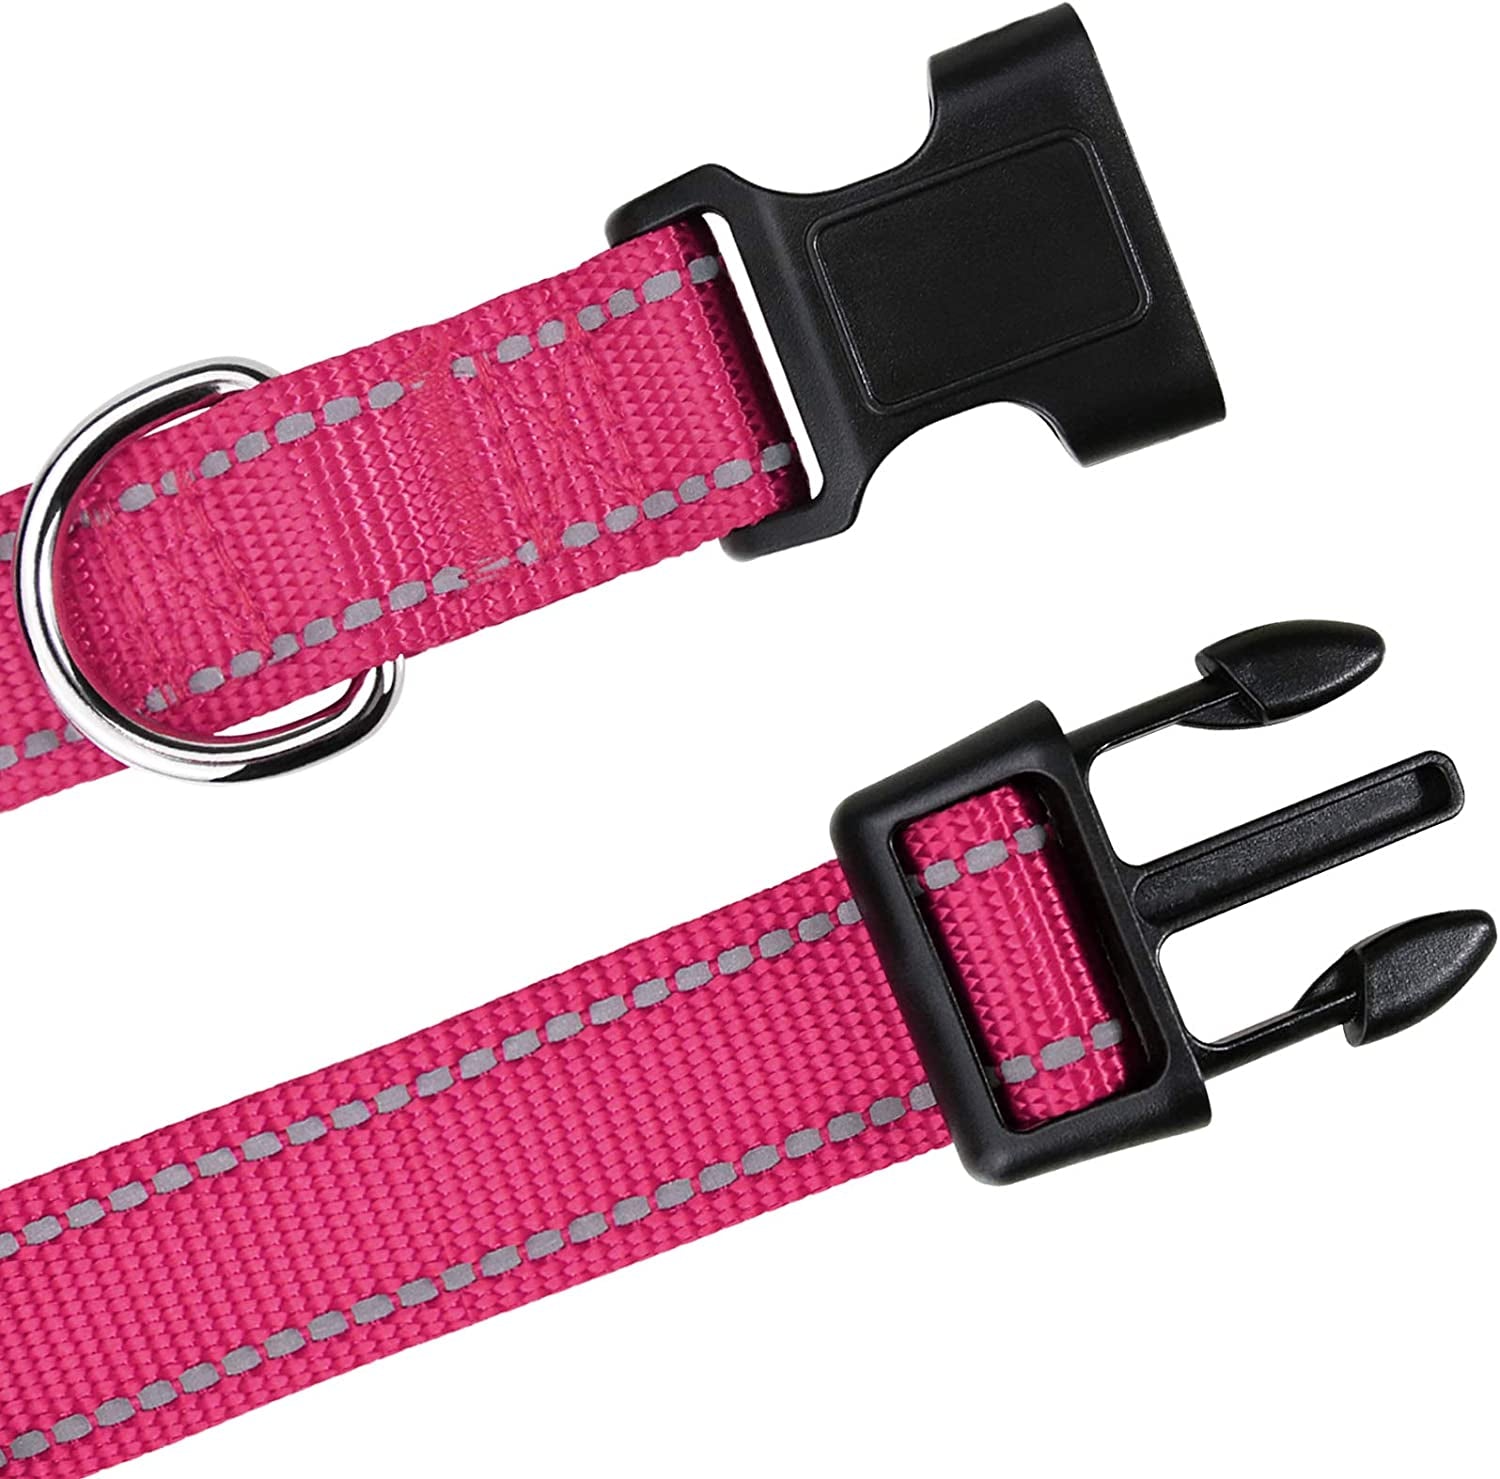 Reflective Nylon Dog Collars, Adjustable Classic Dog Collar with Quick Release Buckle for Small Dogs, Hot Pink, 5/8" Width